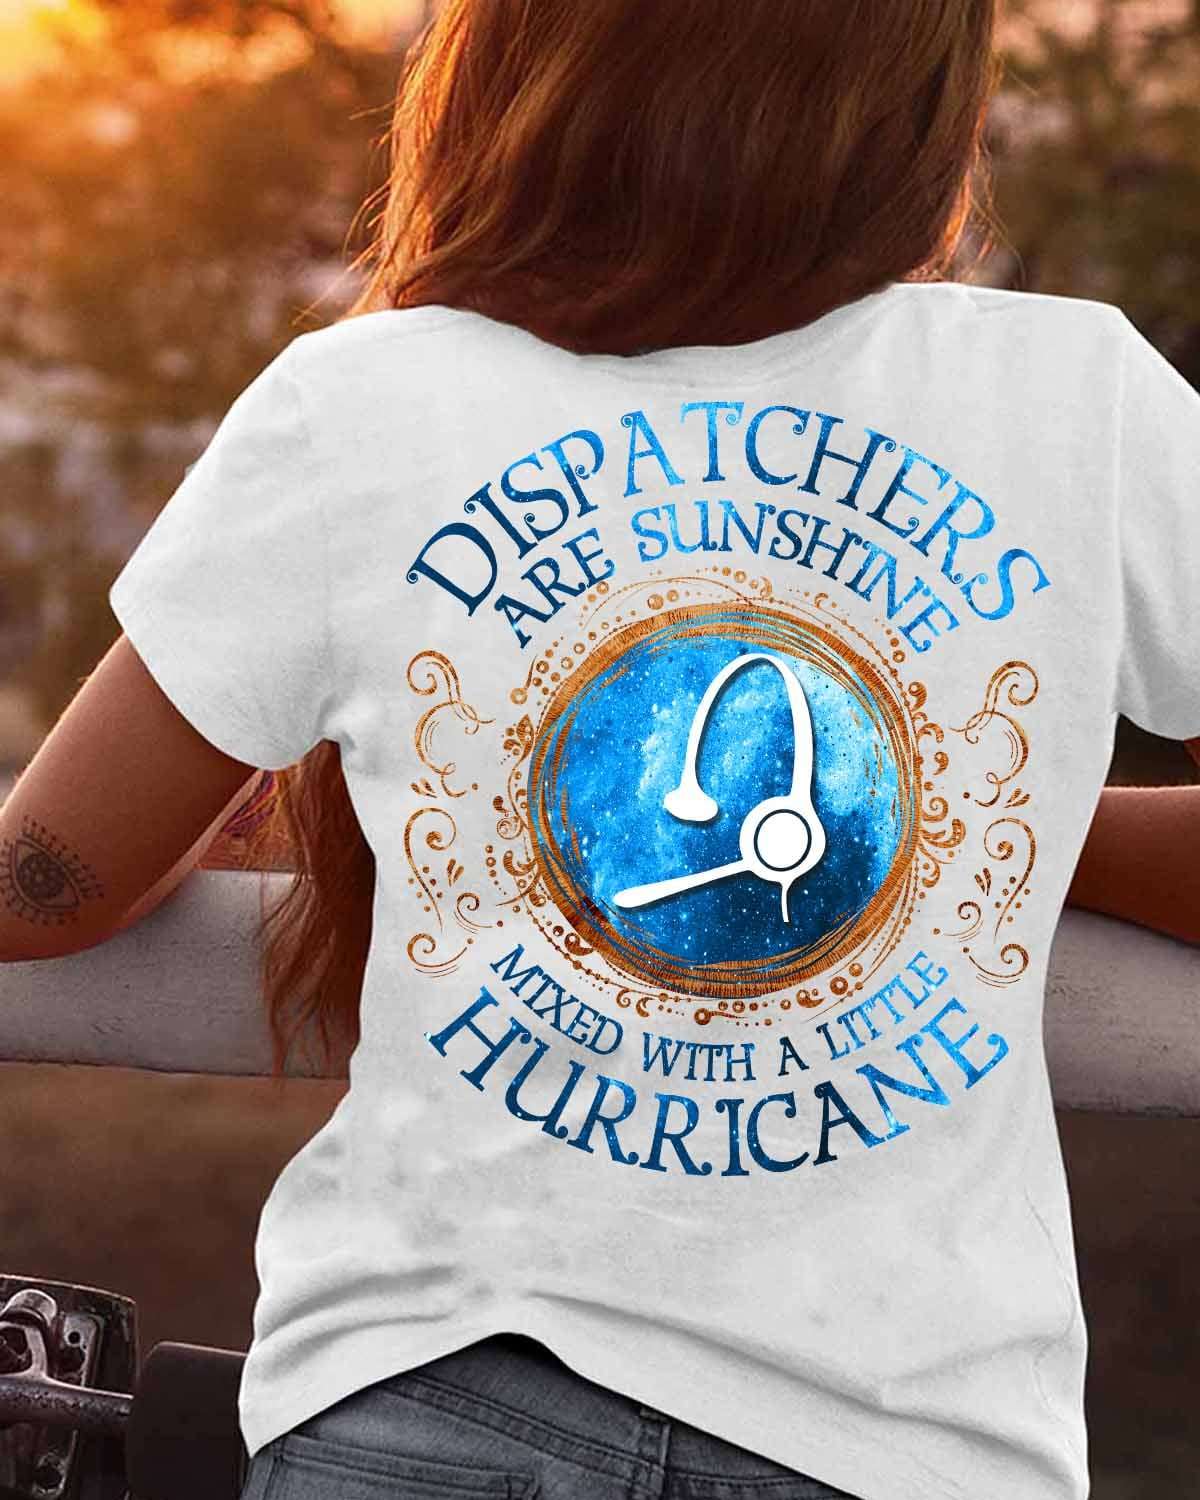 Dispatcher are sunshine mixed with a little hurricane - Dispatcher the job